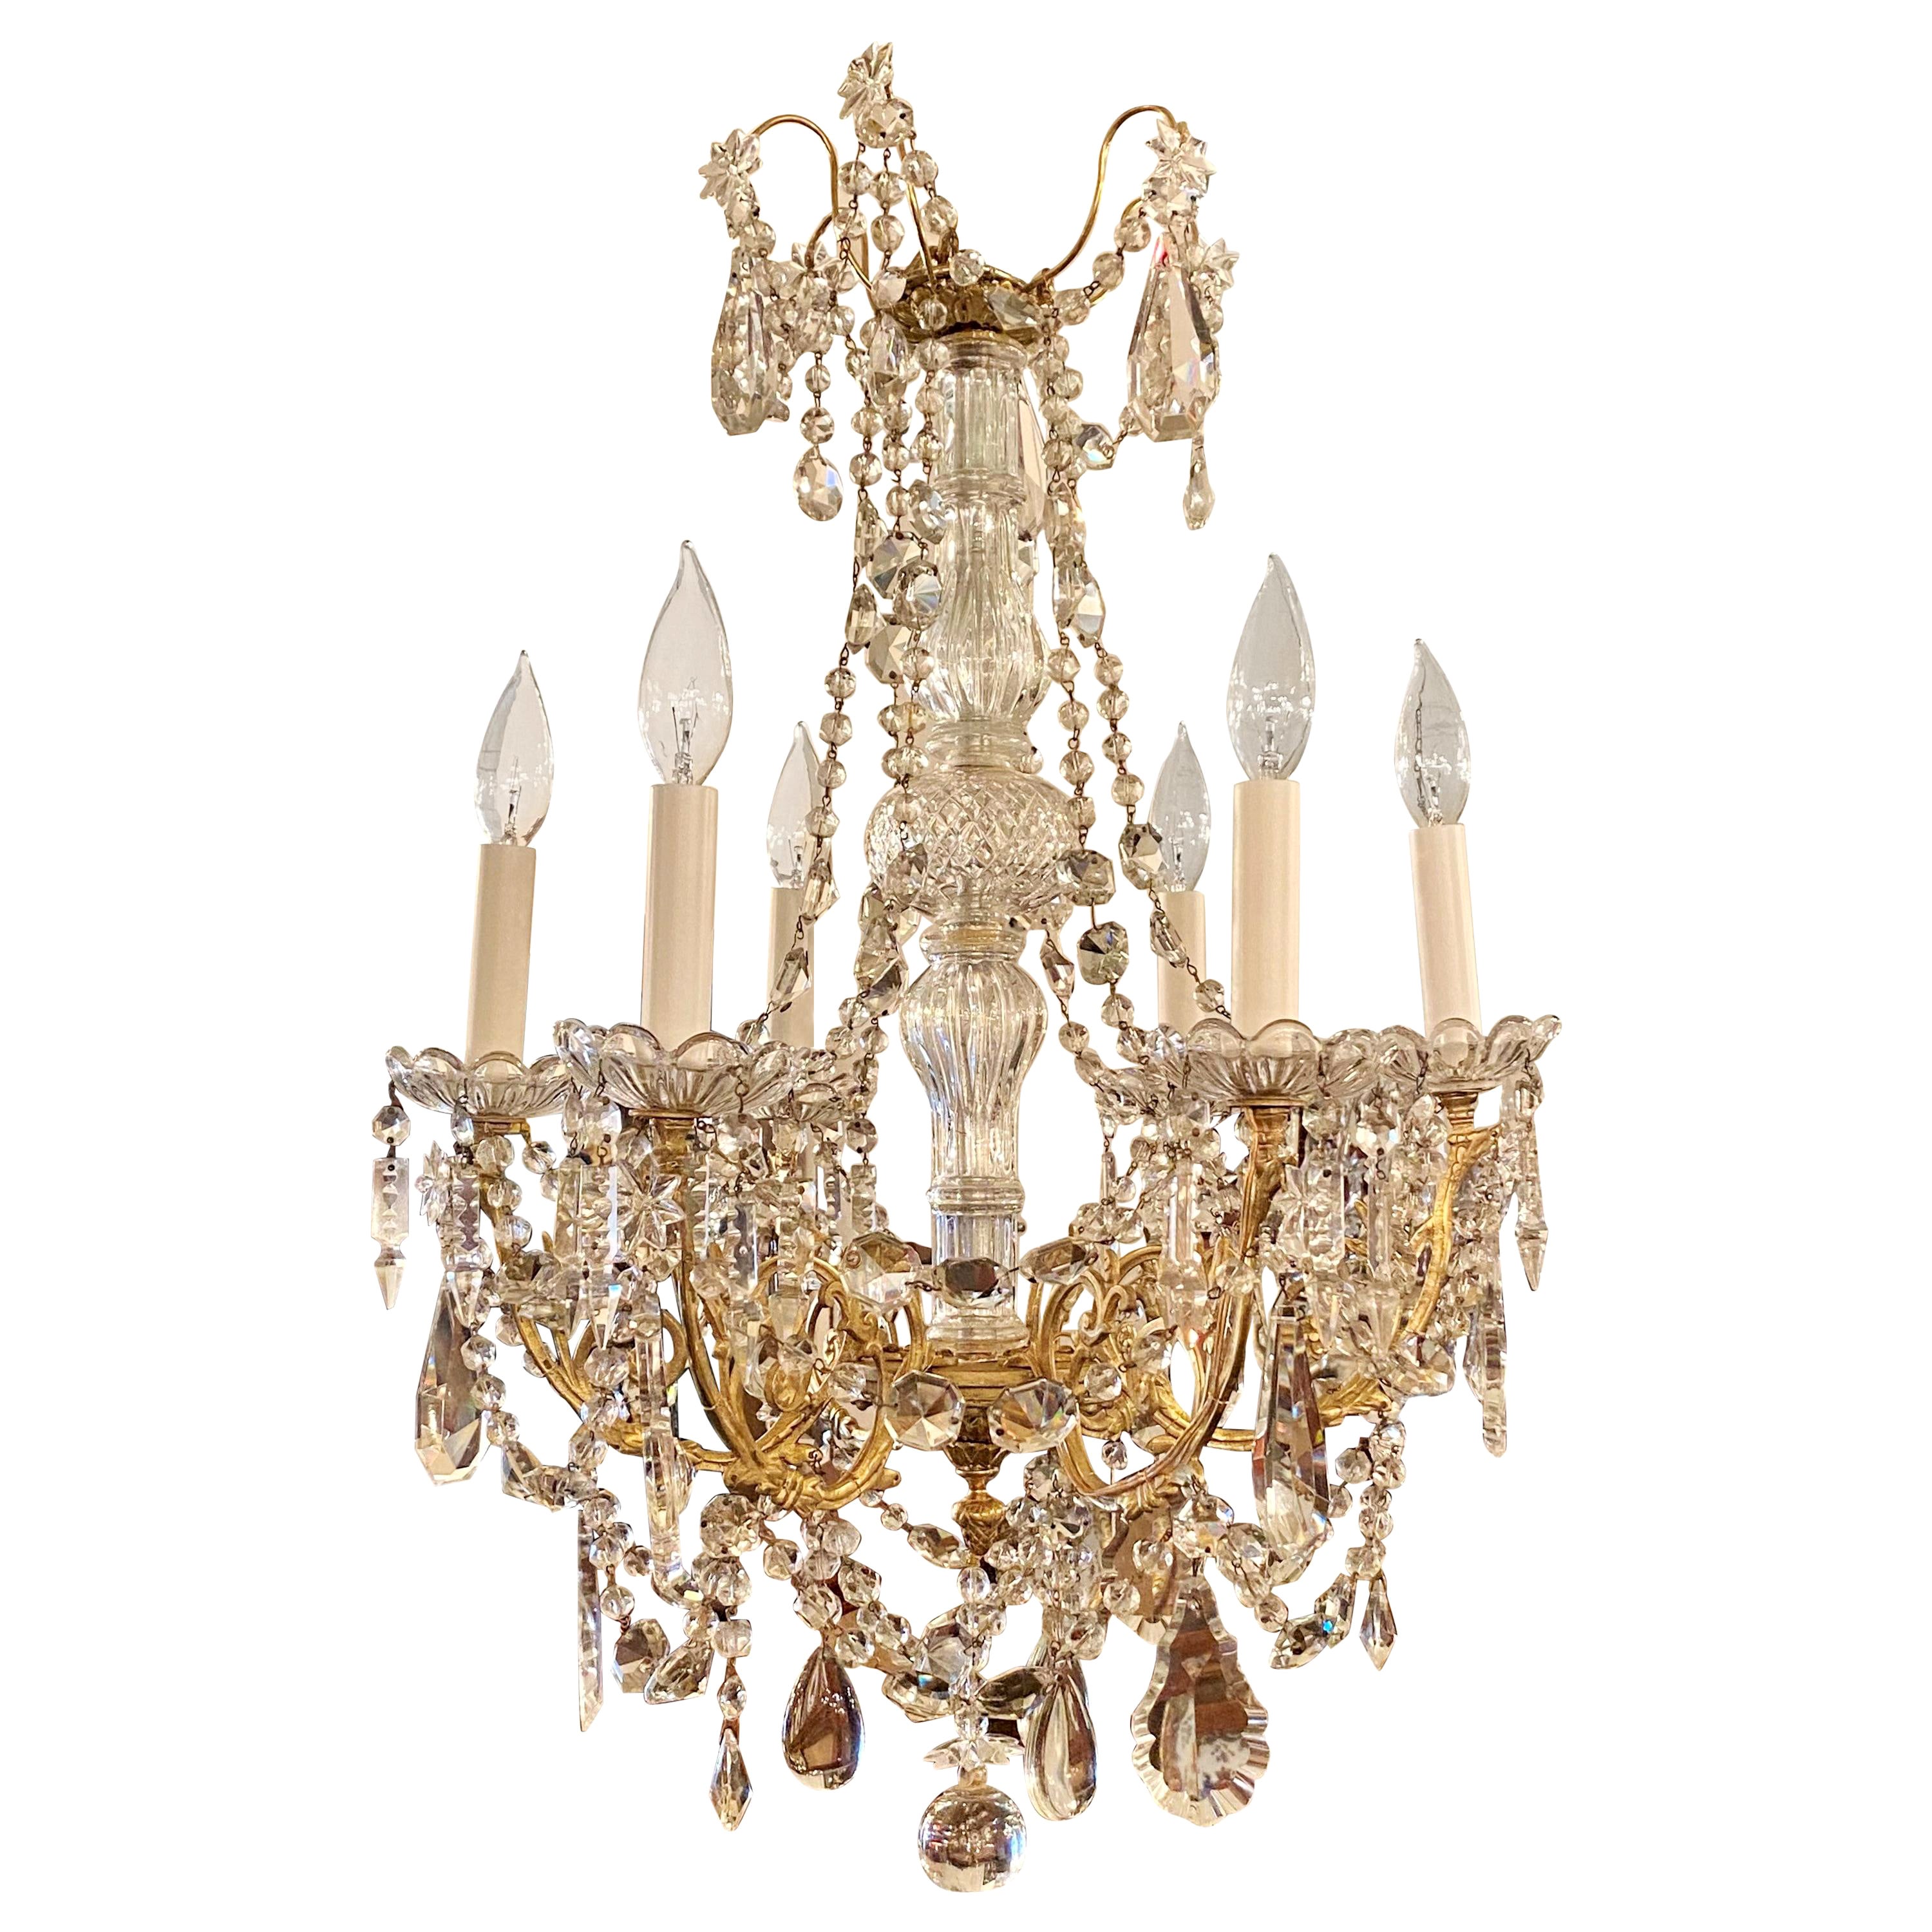 Antique French Gold Bronze and Cut Crystal 6-Light Chandelier, circa 1890